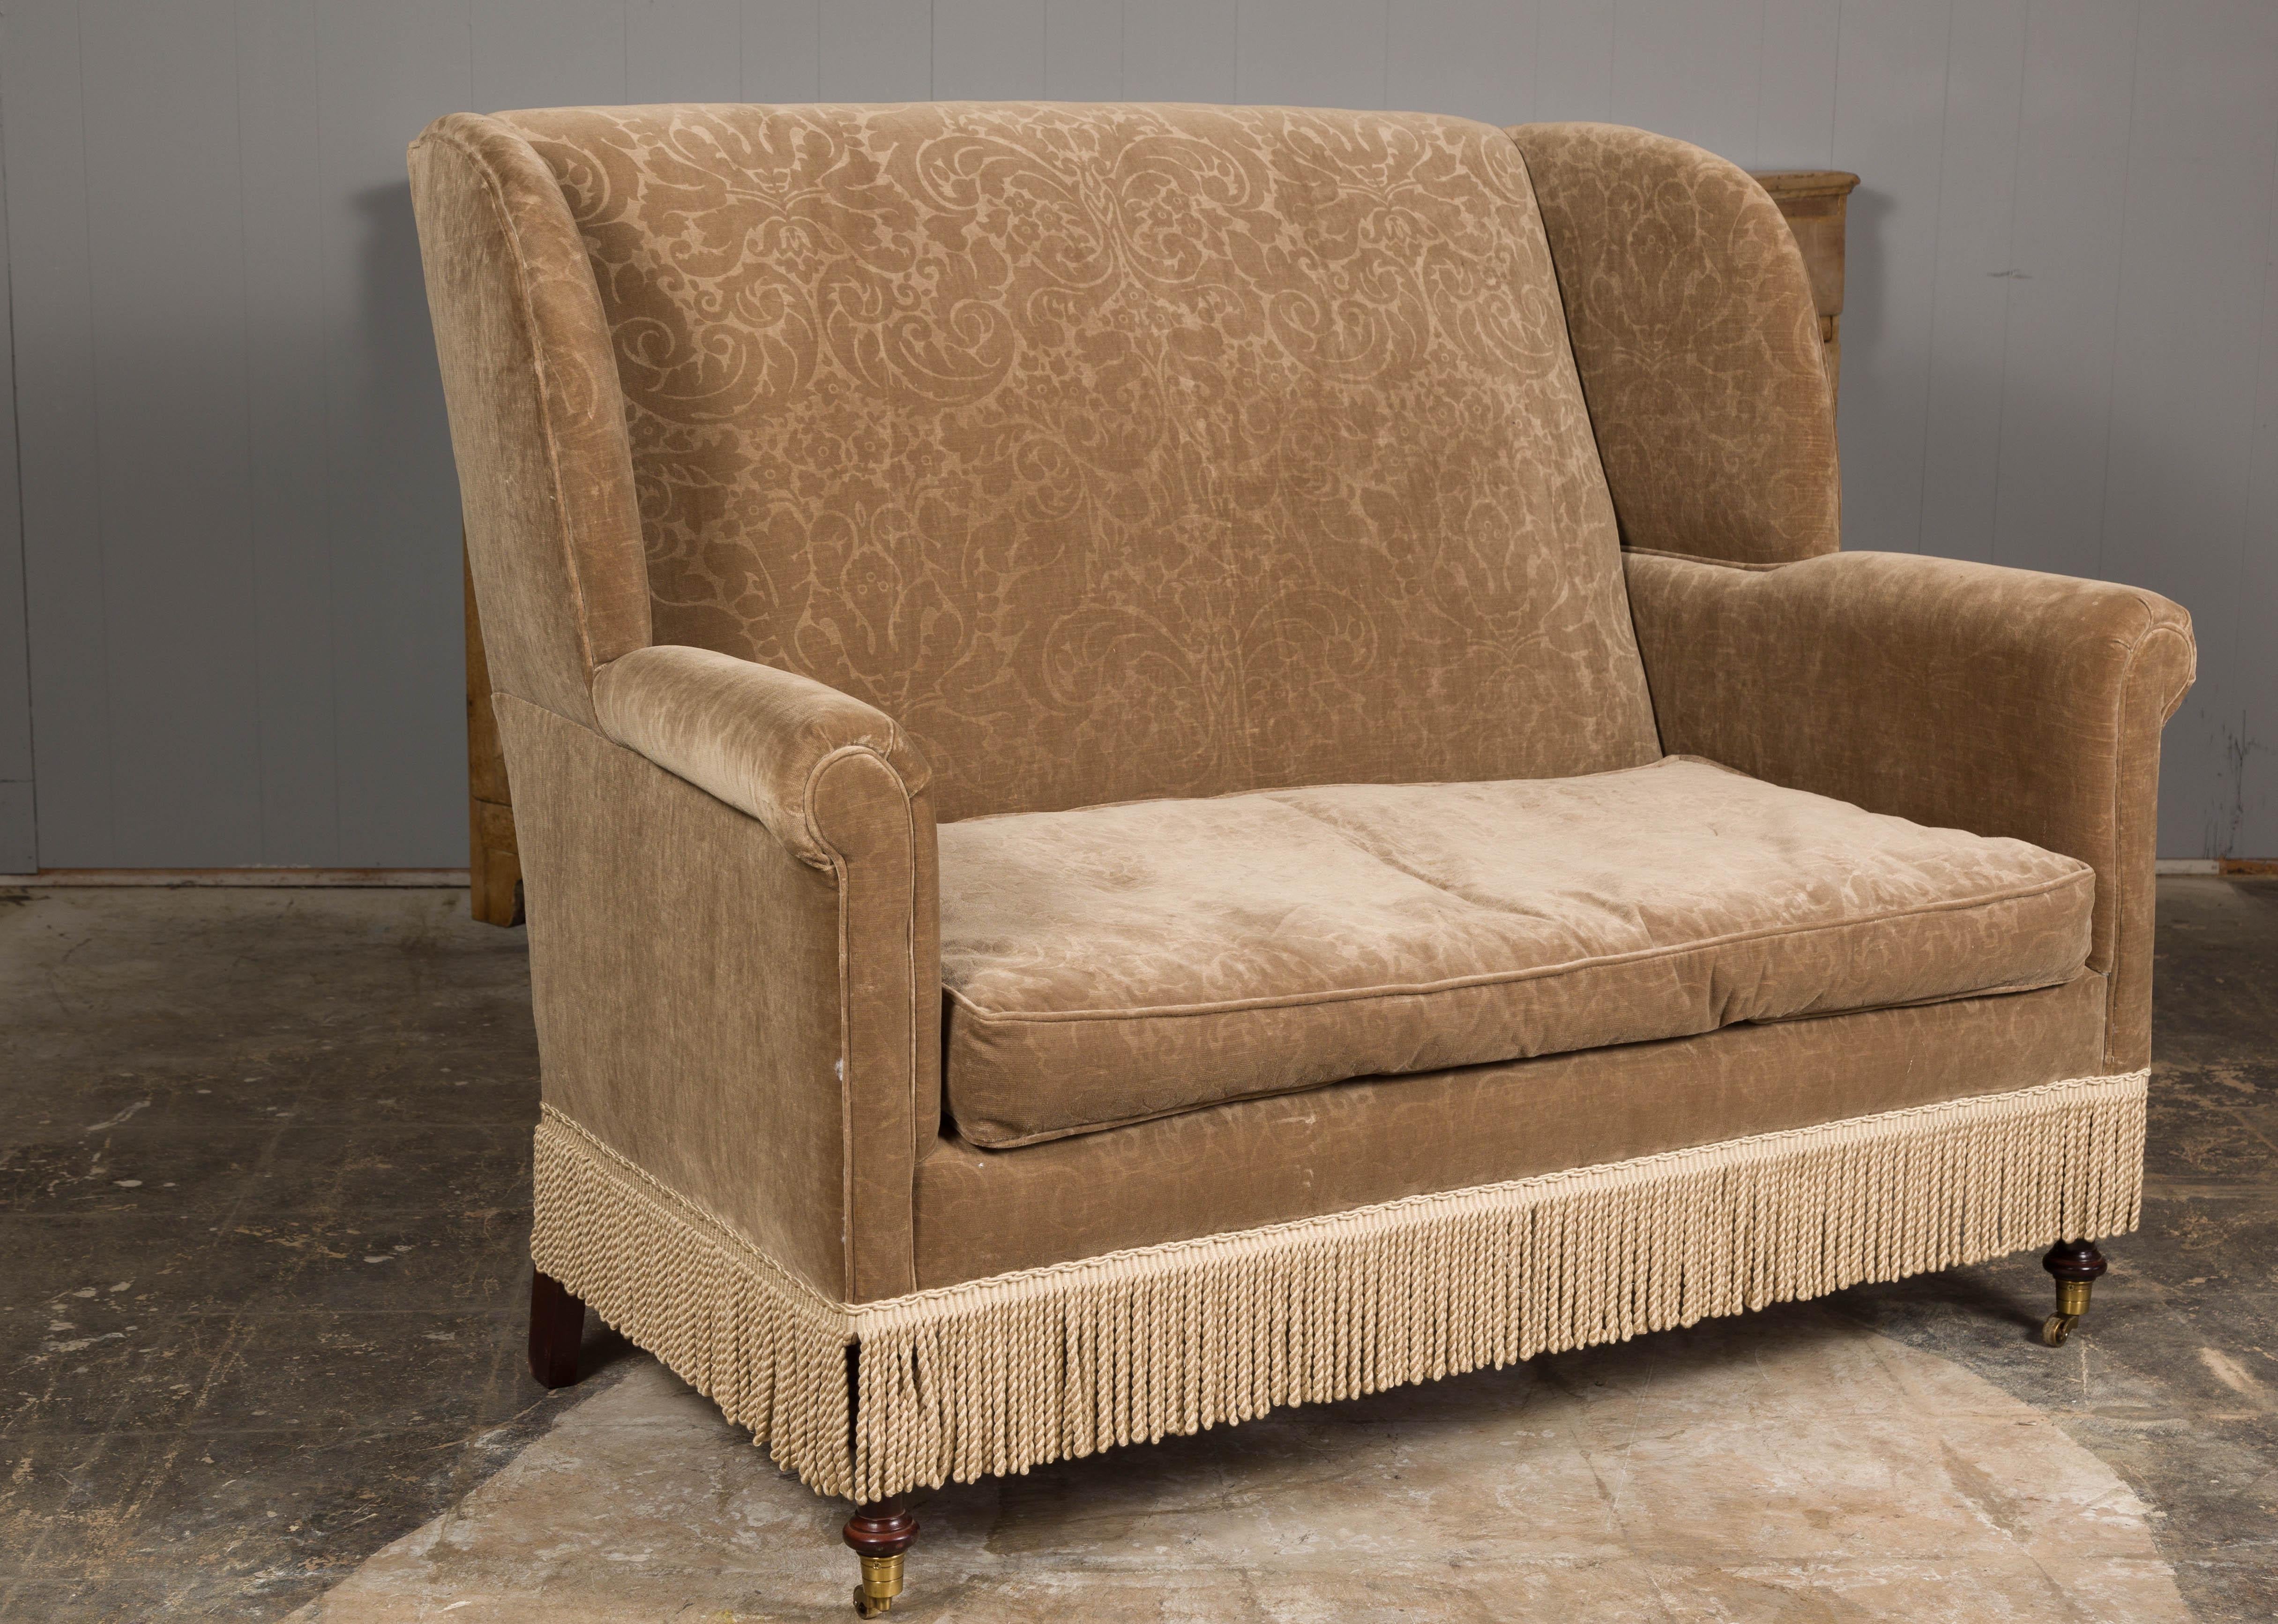 Vintage English Upholstered Loveseat with Out-Scrolling Arms and Casters For Sale 3